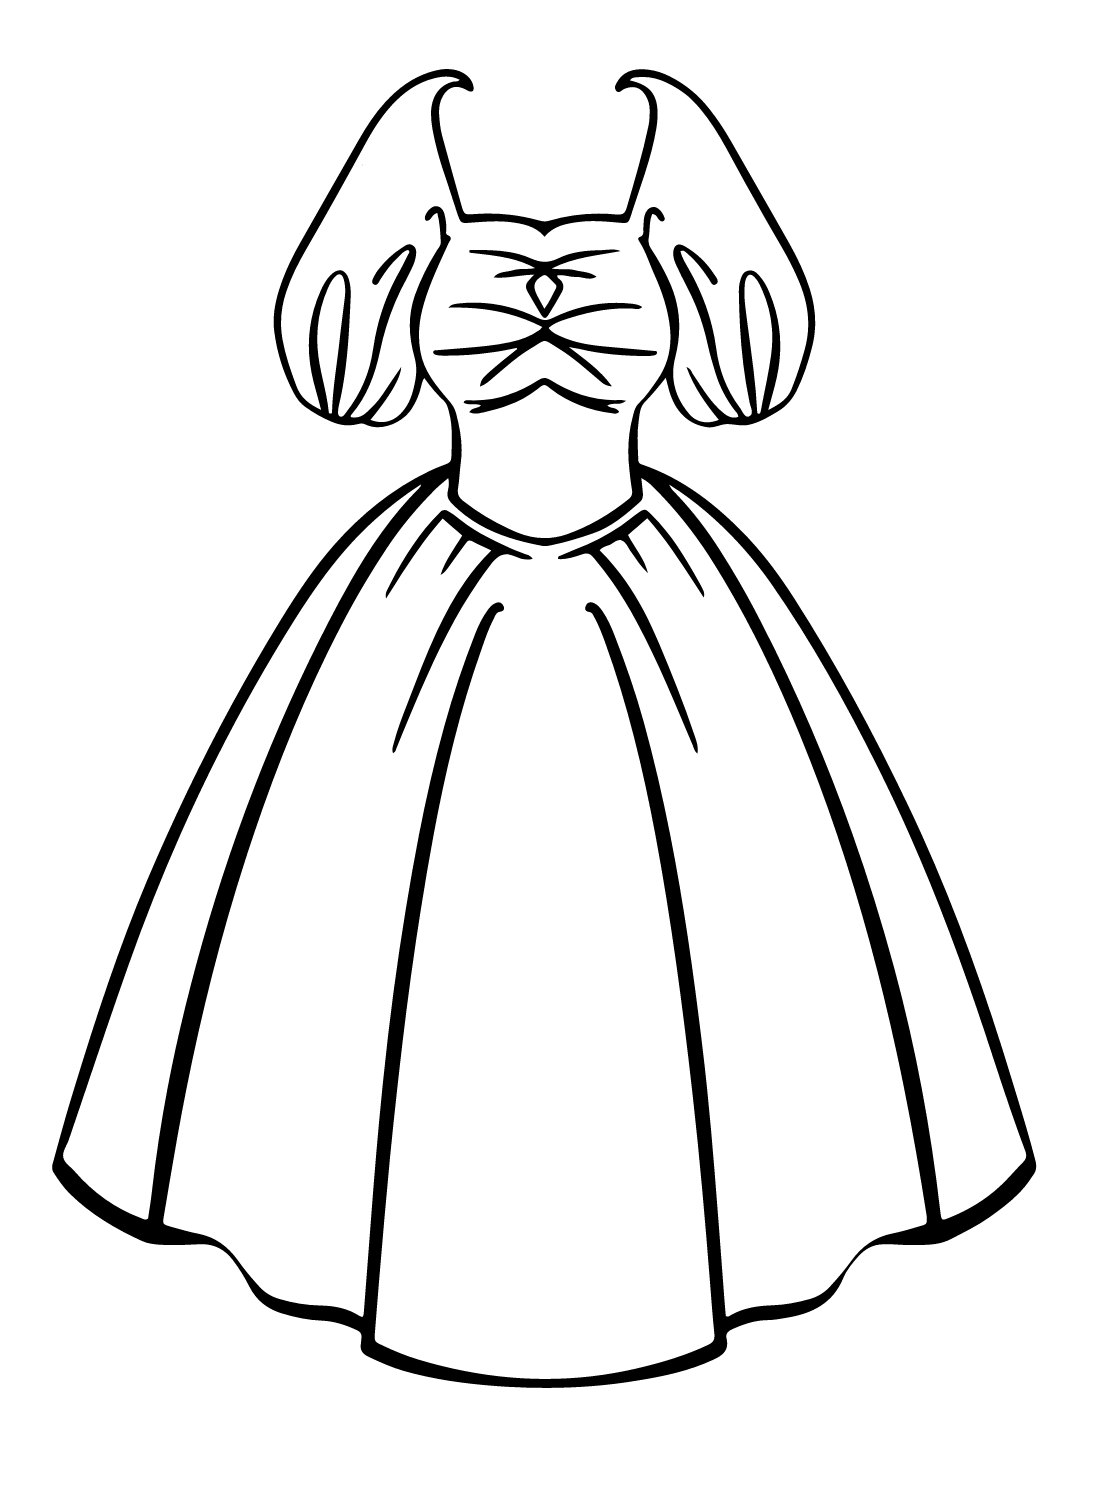 Wedding Dress Images Coloring Page